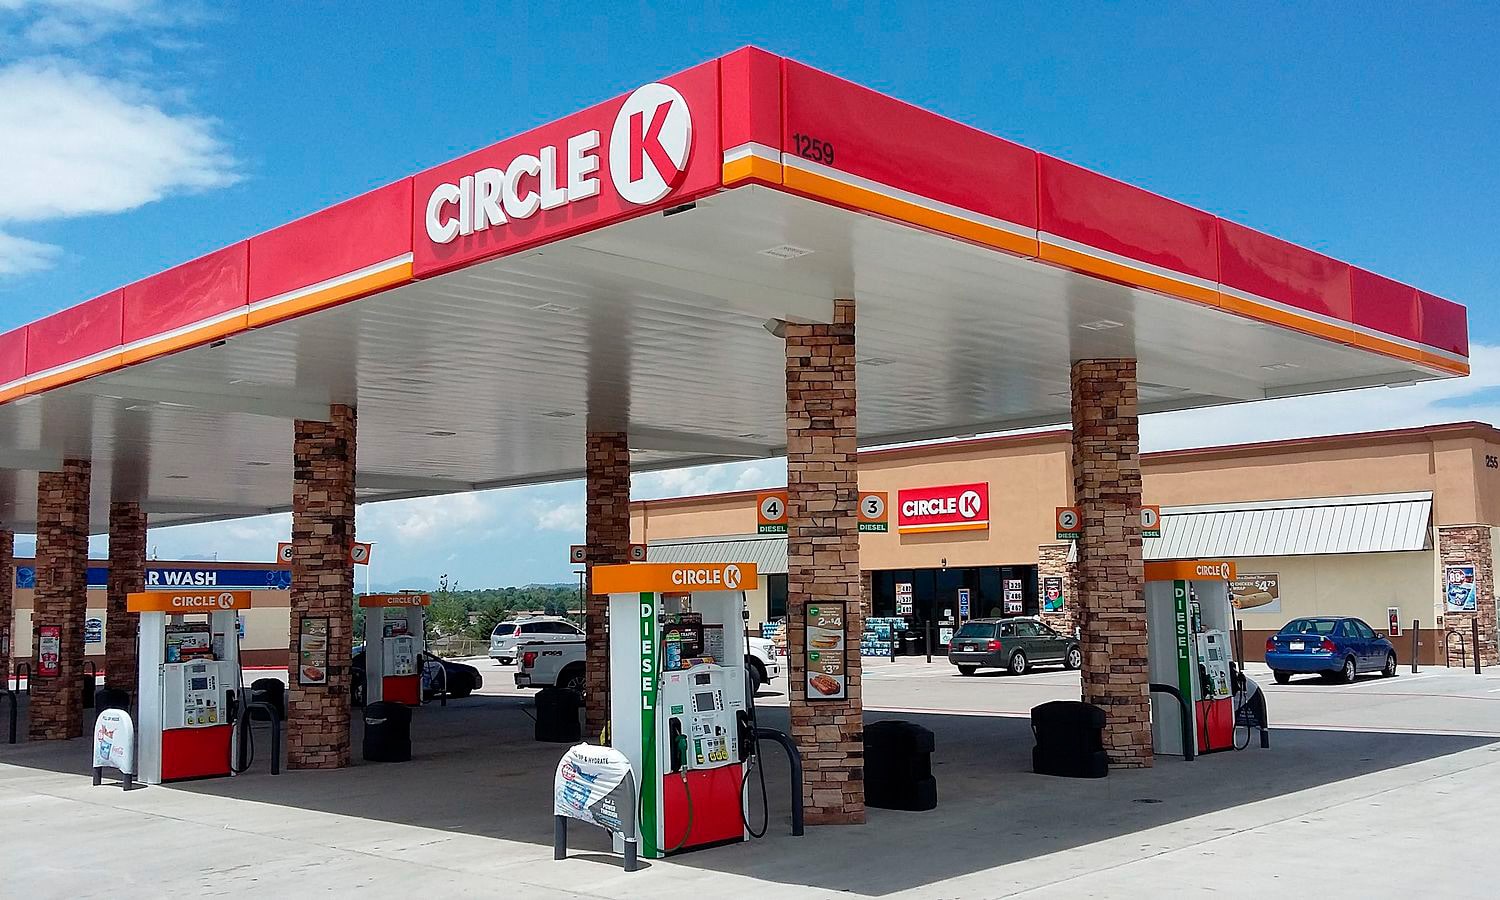 Cannabis is approaching circle K